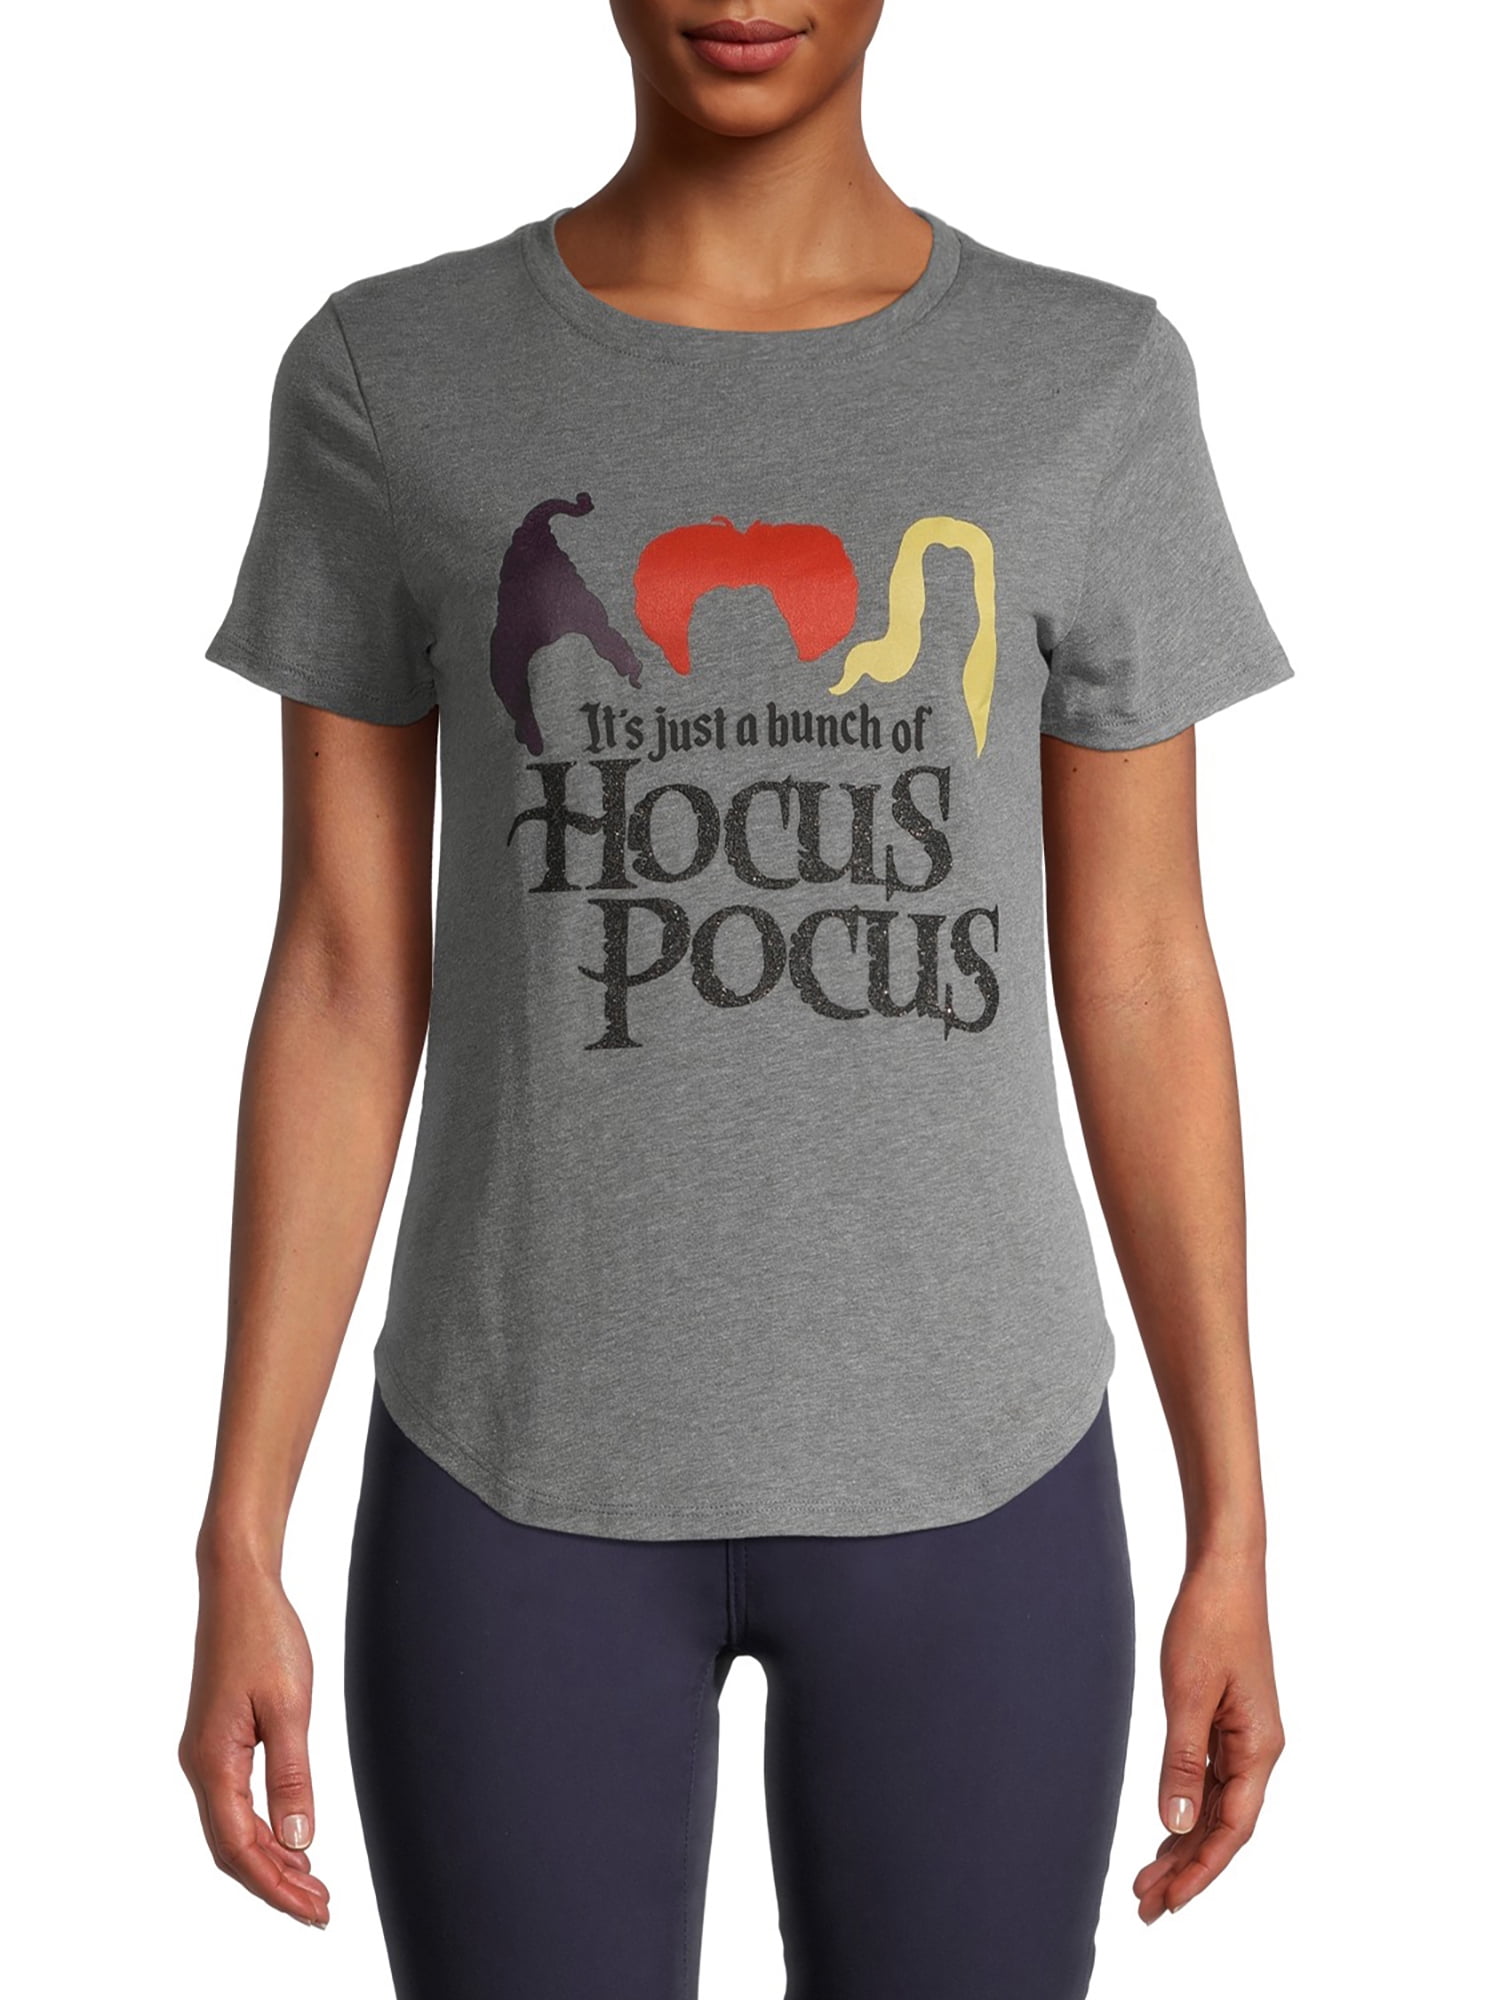 JEALLY Its Just A Bunch of Hocus Pocus T-Shirt Funny Graphic Tee Shirt for Women Halloween T Shirts